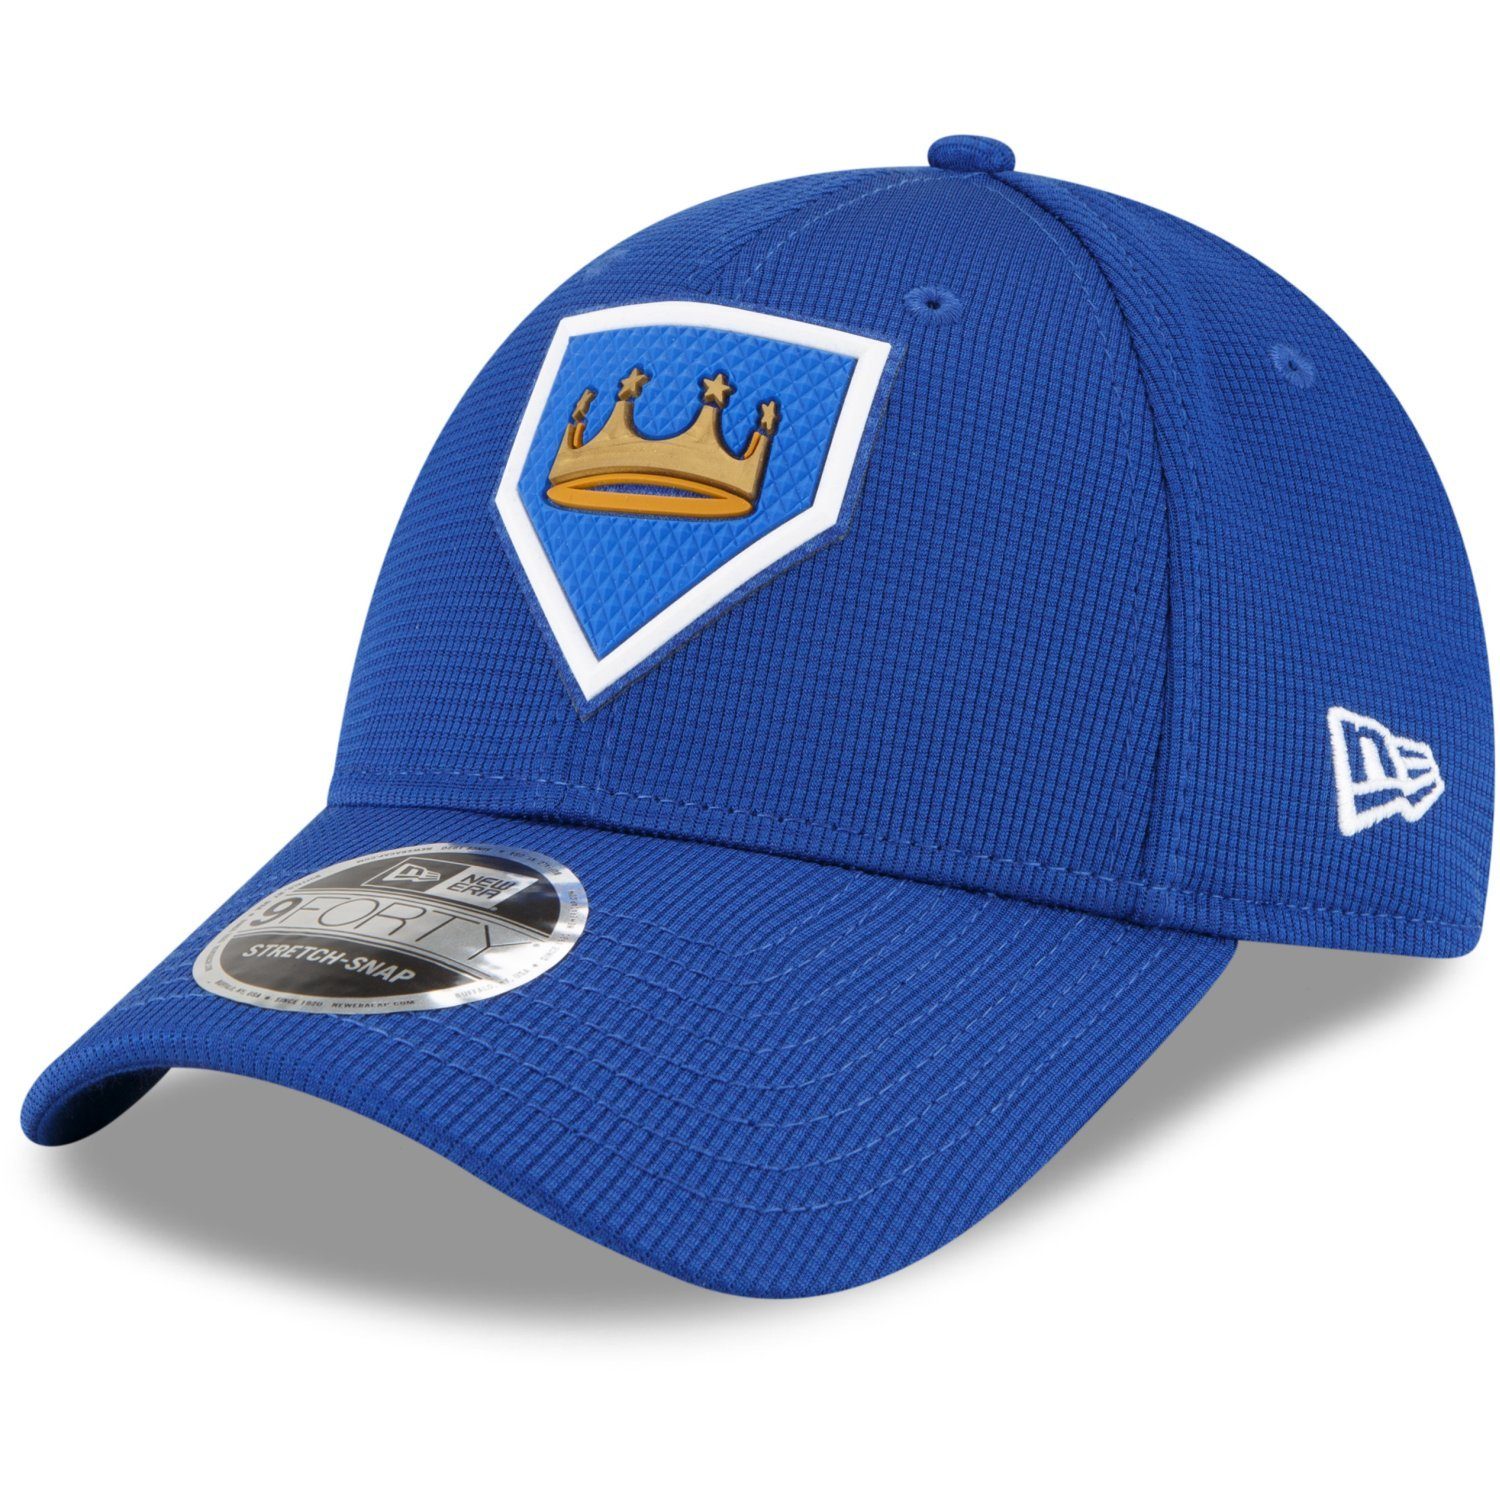 New Era Fitted Cap 9FORTY StretchFit MLB CLUBHOUSE 2022 Kansas City Royals